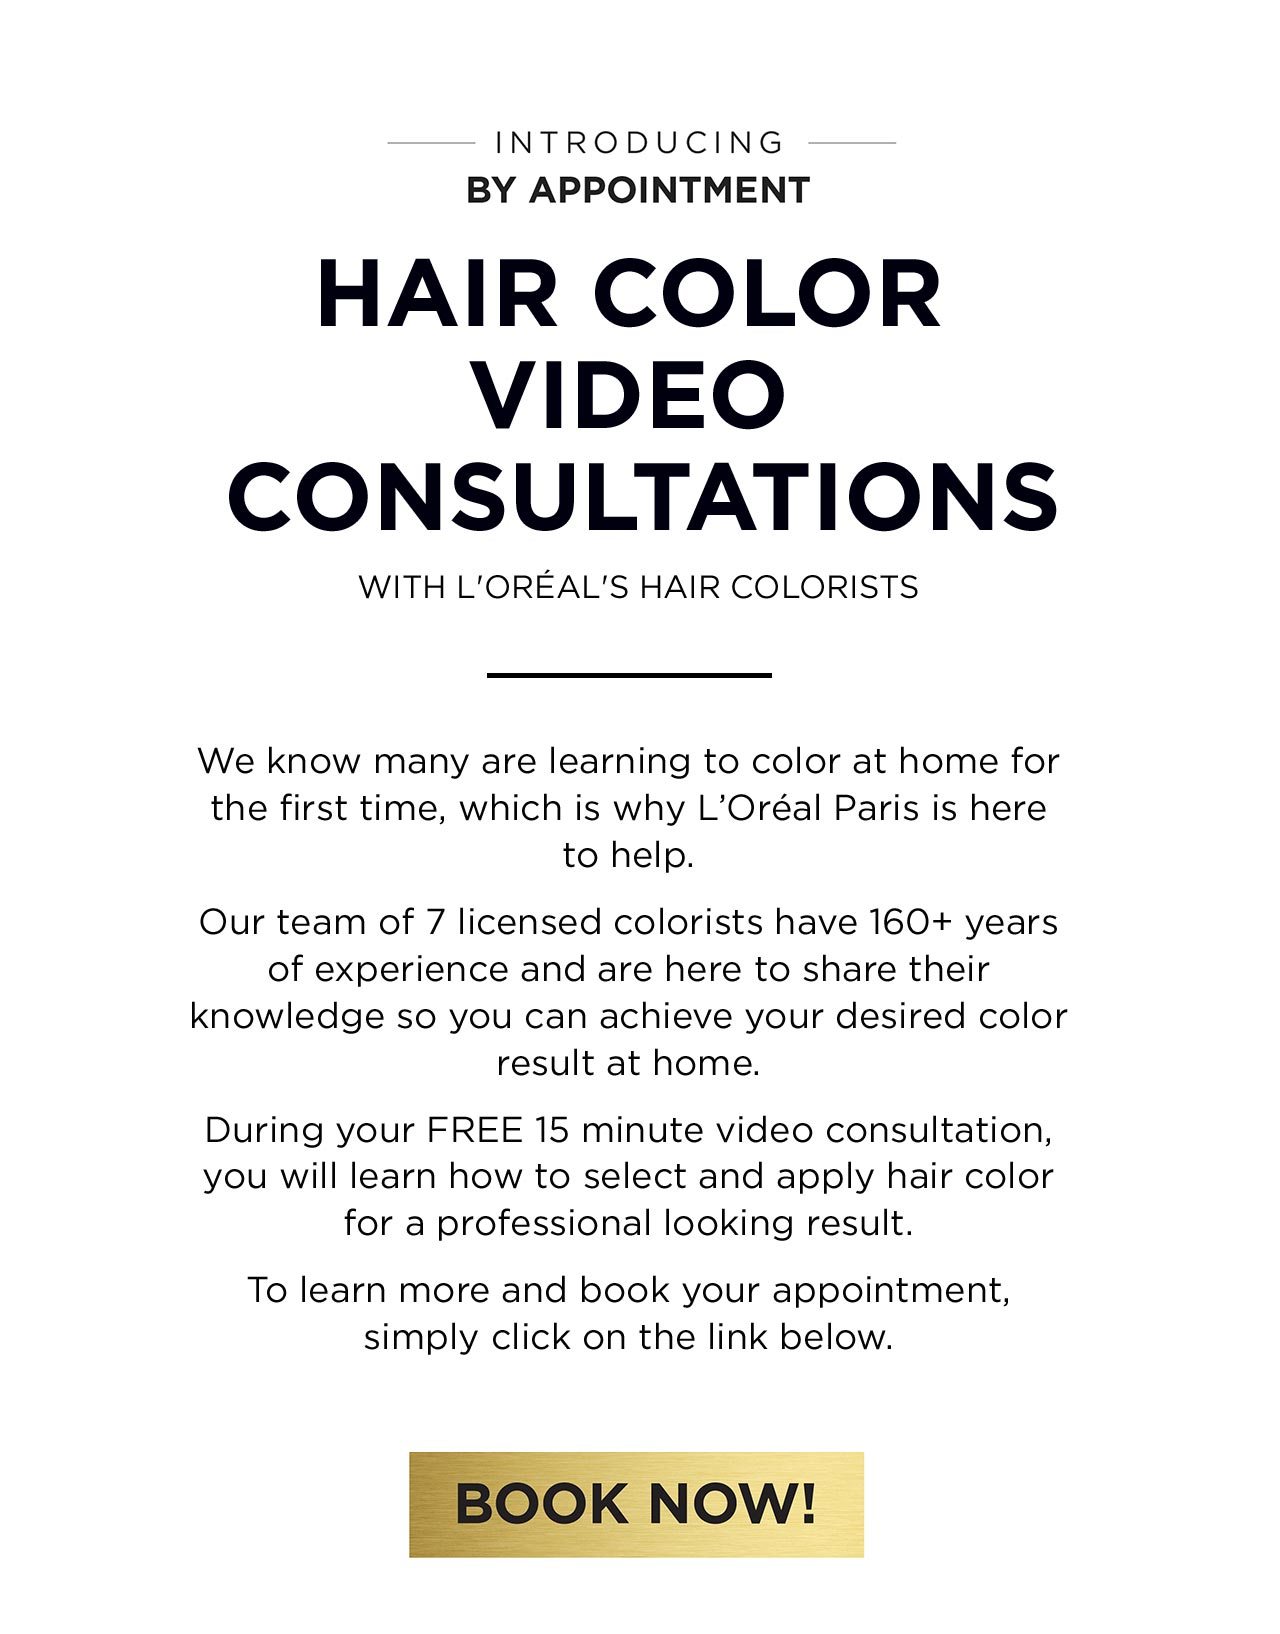 Introducing hair color video consultations with L'Oréal's hair colorists - FREE 15 minute video consultation - Book Now